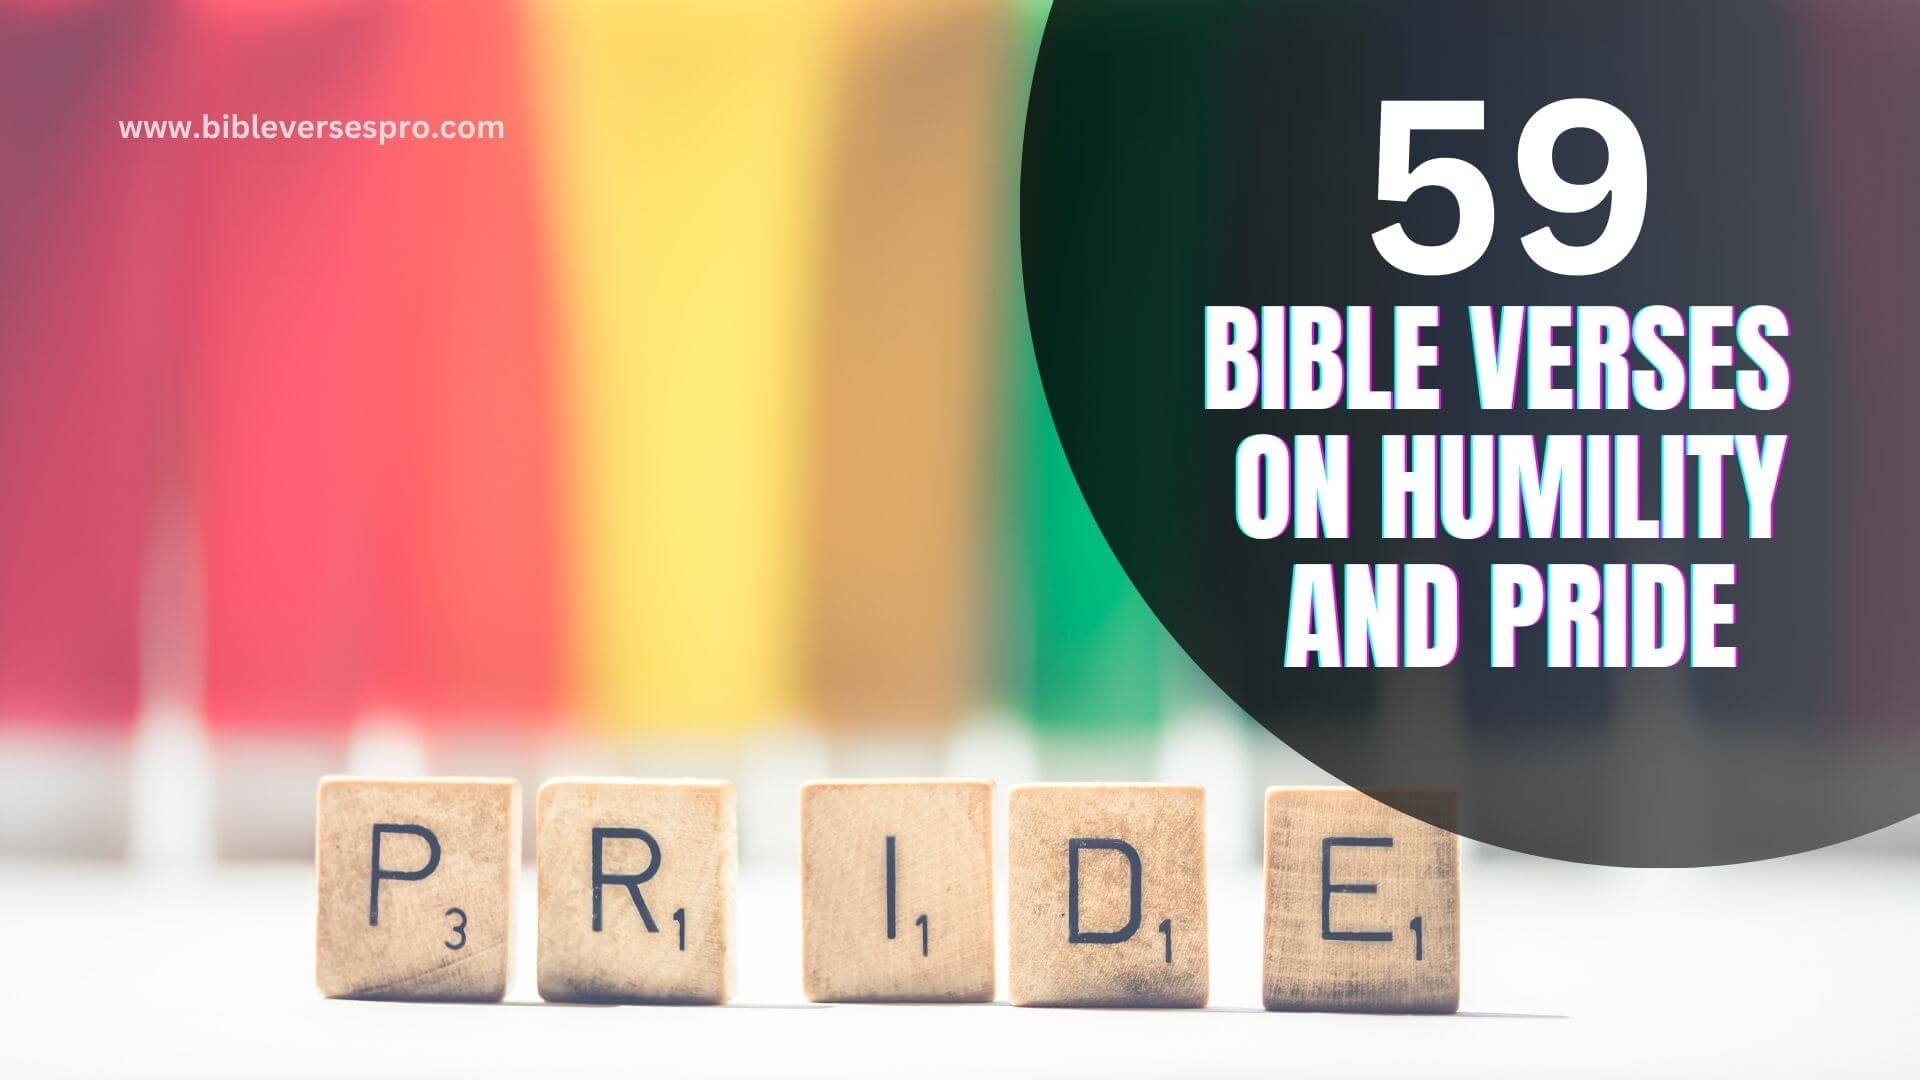 BIBLE VERSES ON HUMILITY AND PRIDE